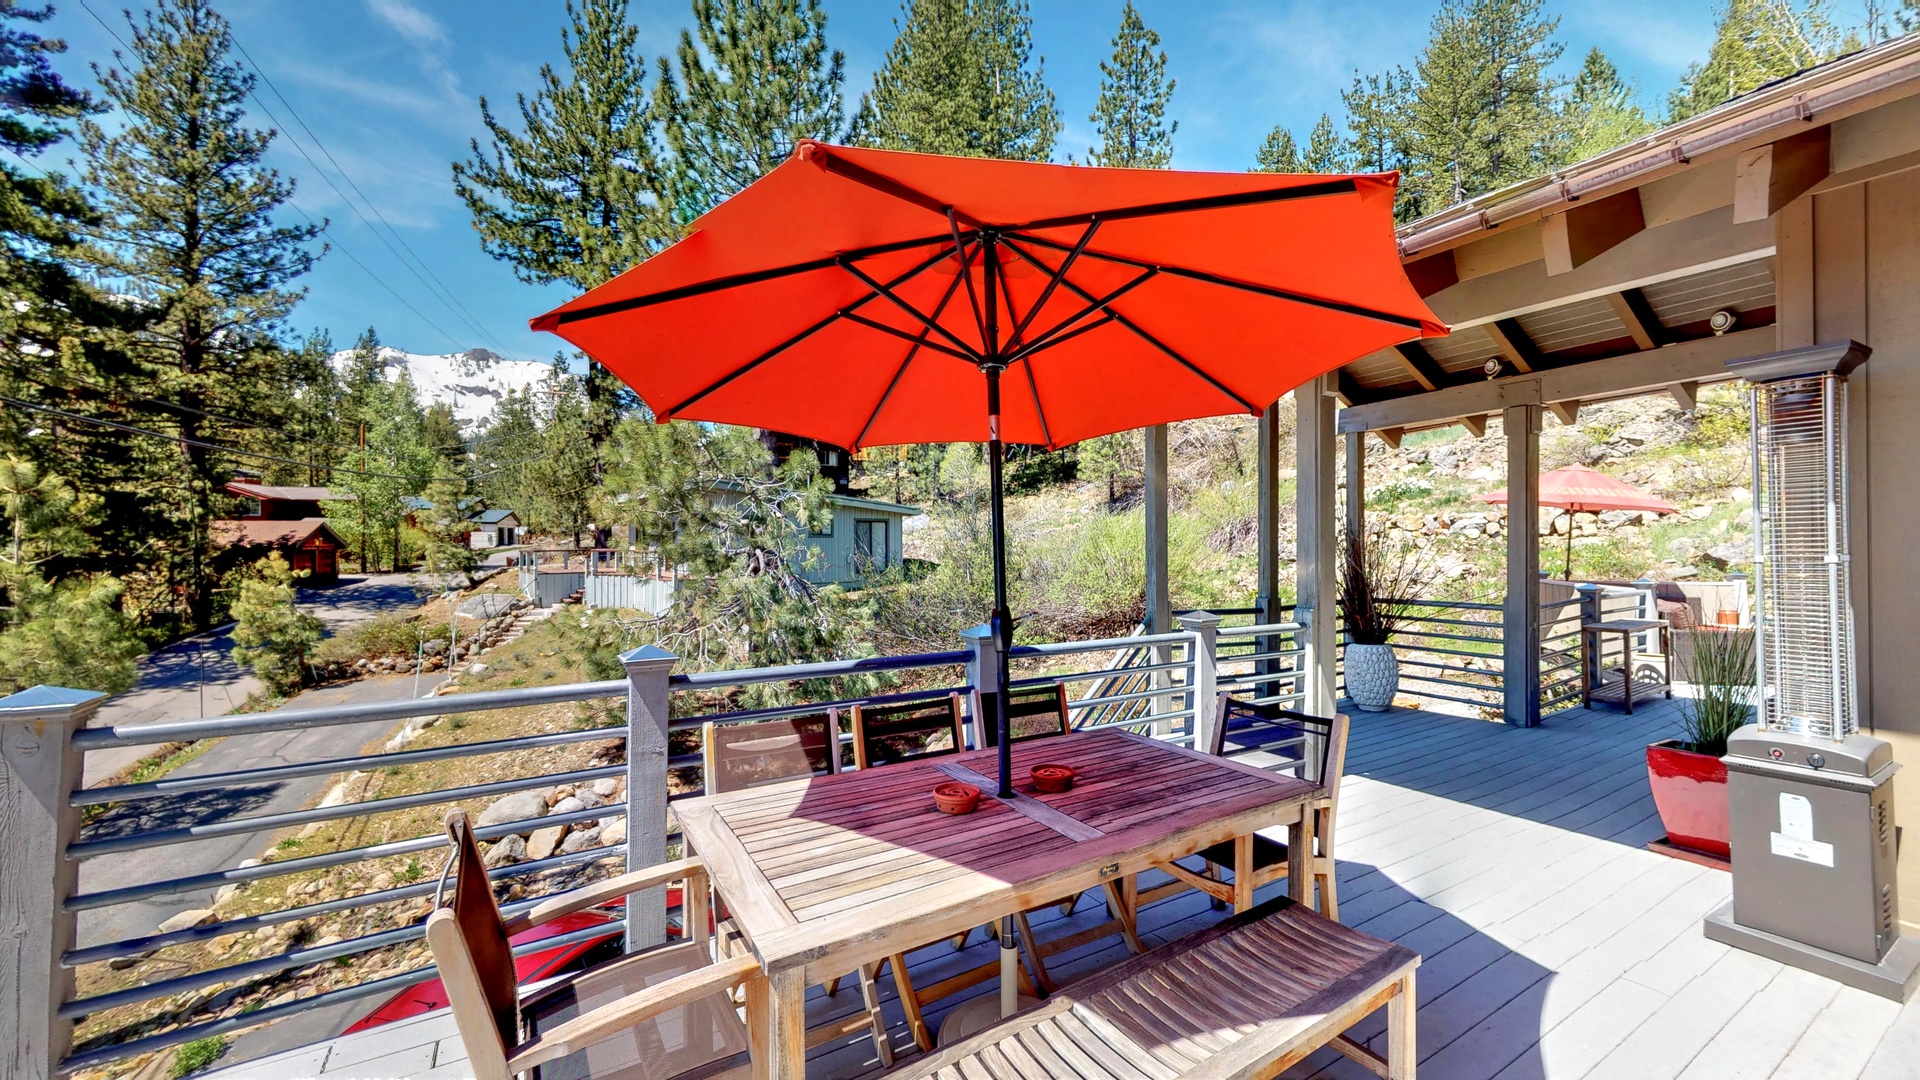 Outdoor seating with umbrella at this squaw valley rental: Eagle's Nest Lodge